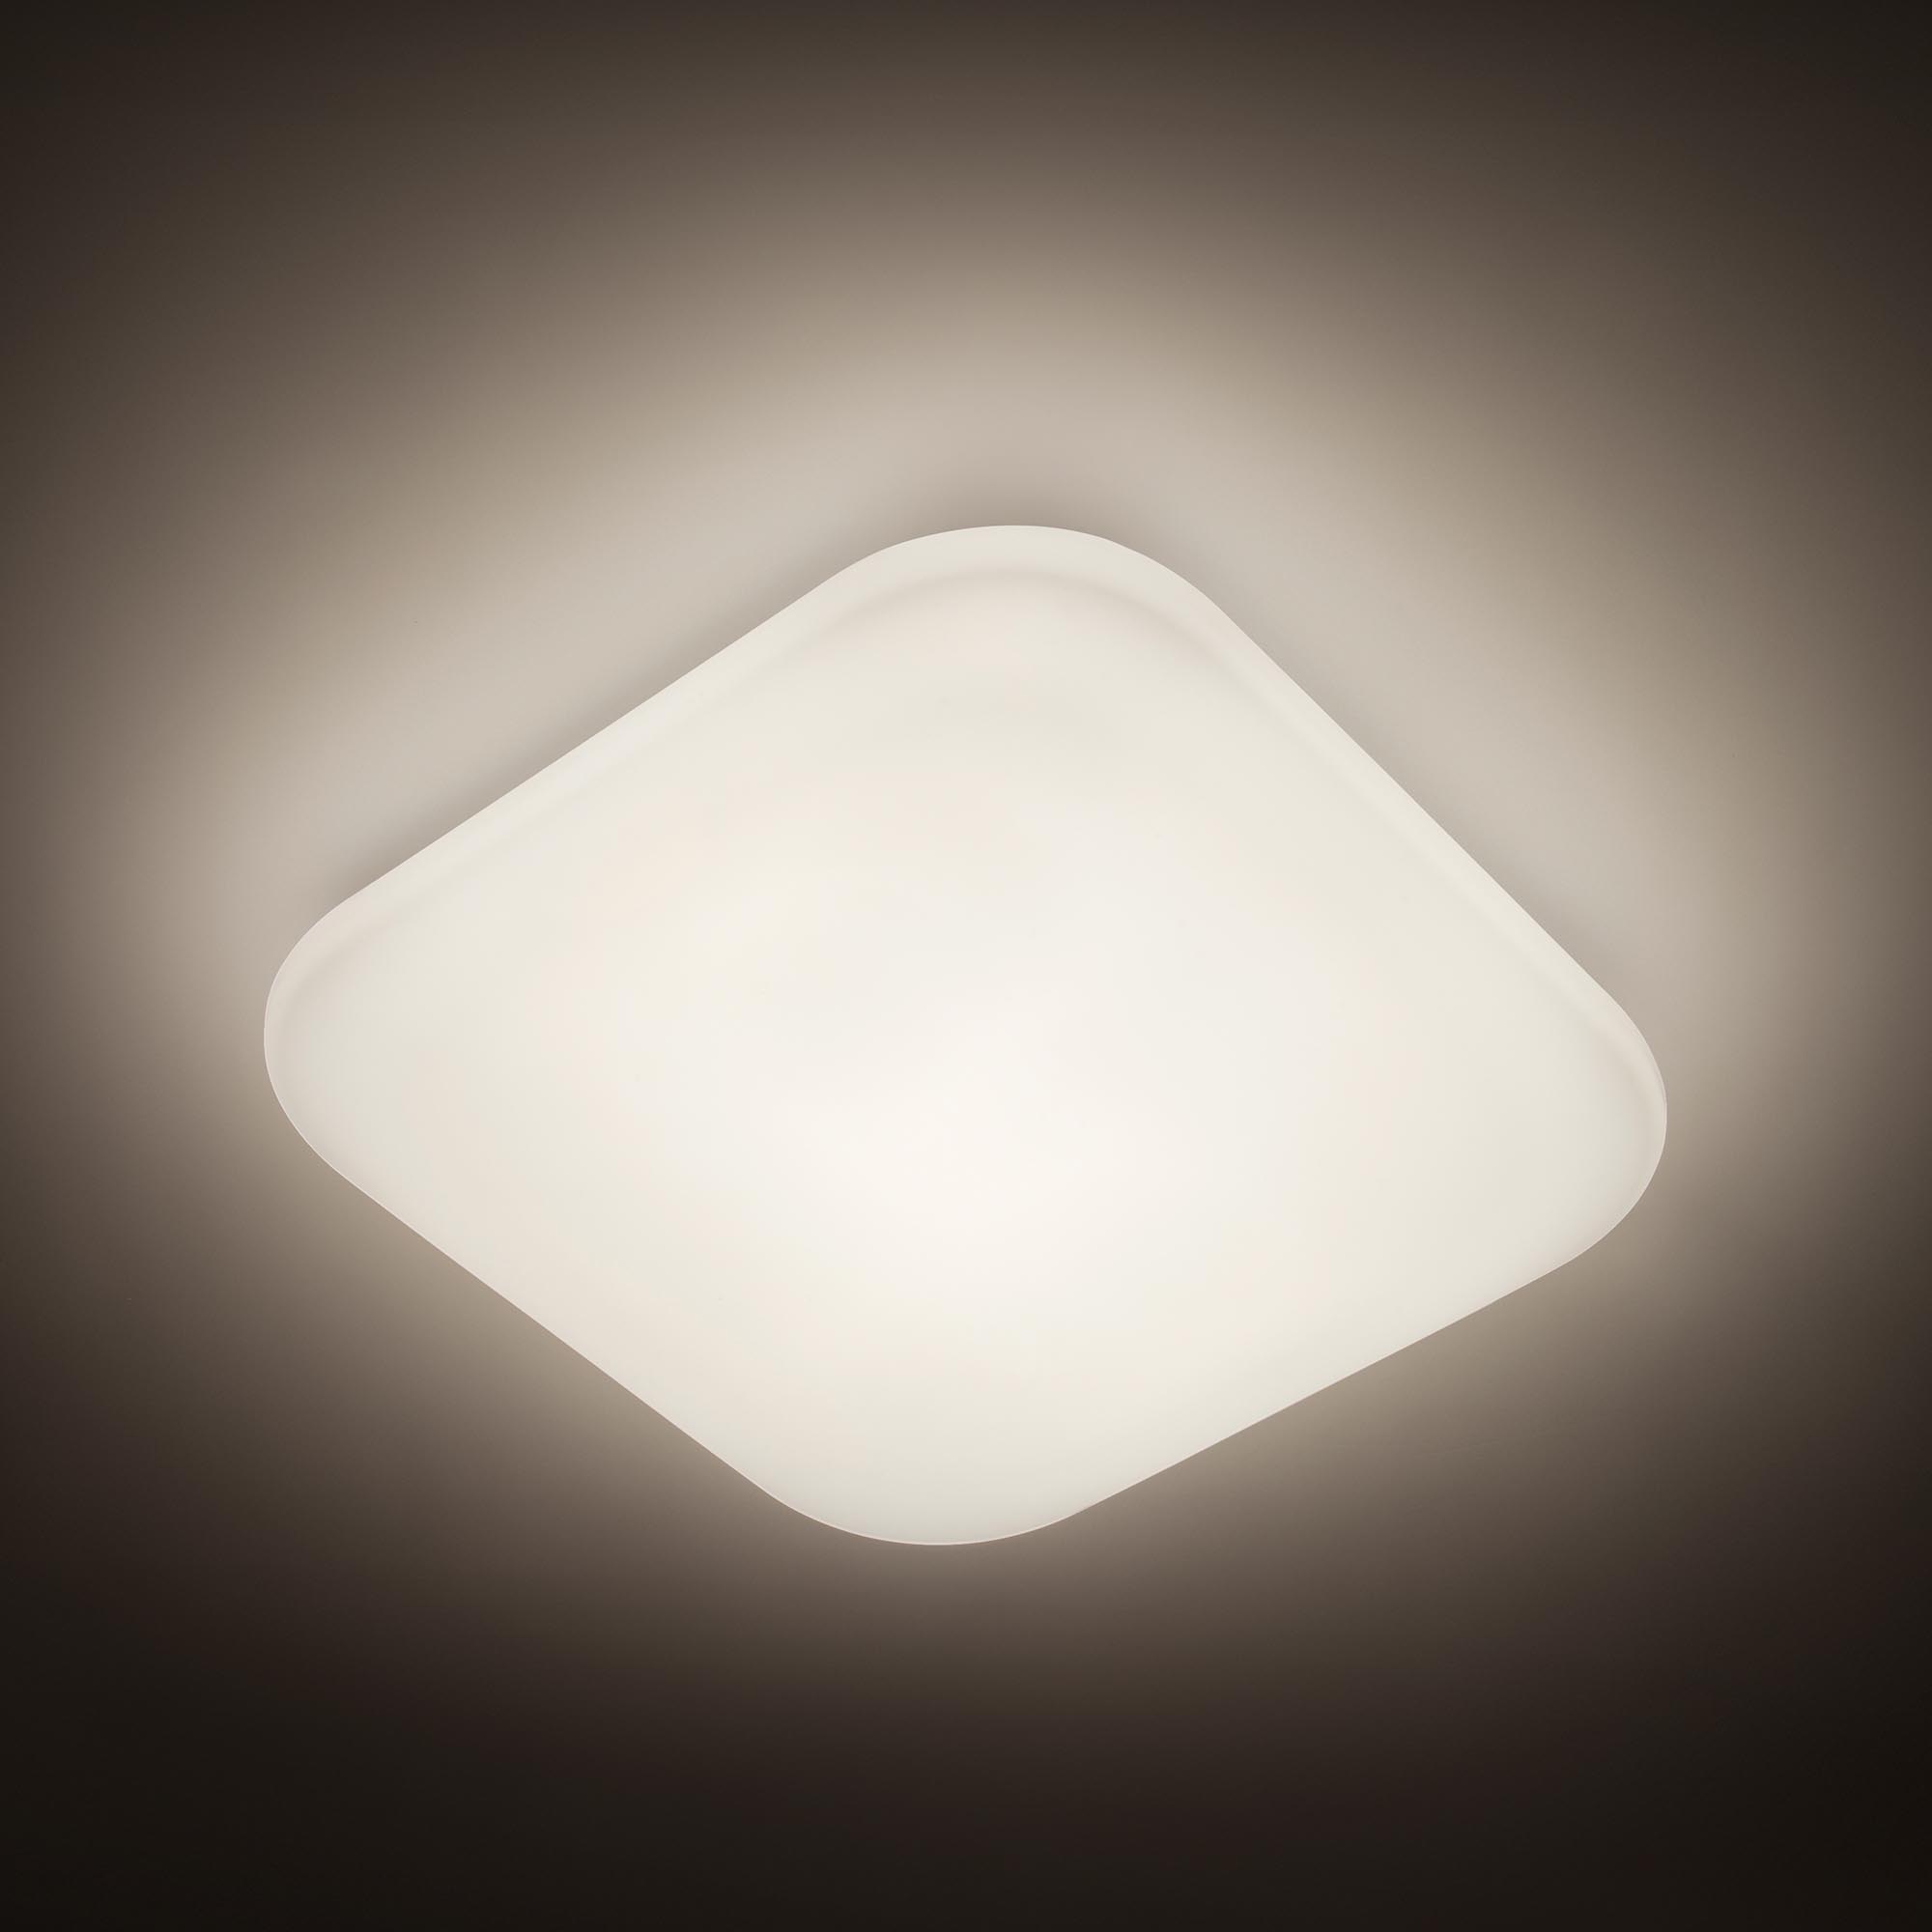 Philips myLiving LED ceiling light Mauve white square 1700lm 17W